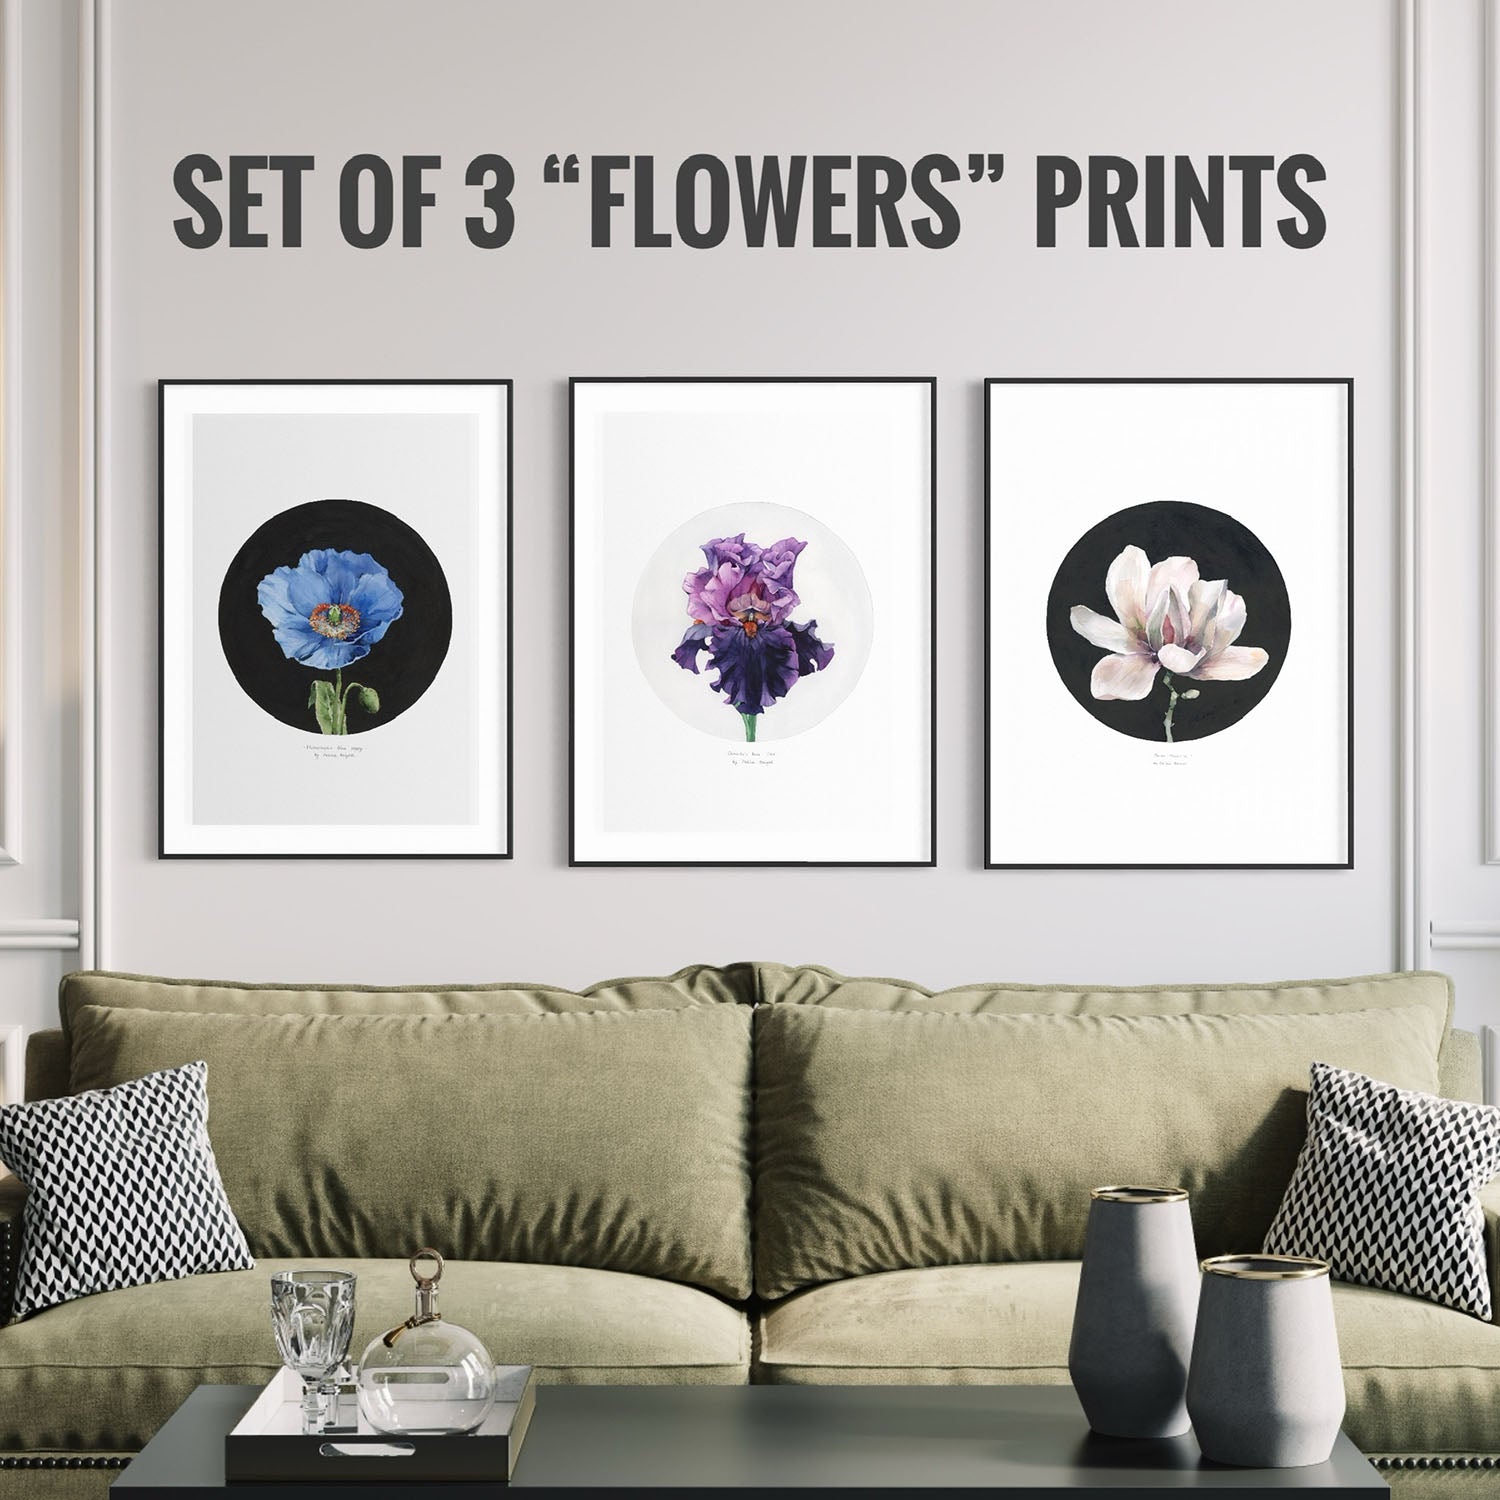 Set of 3 Prints from the "Flowers" collection - Polina Bright